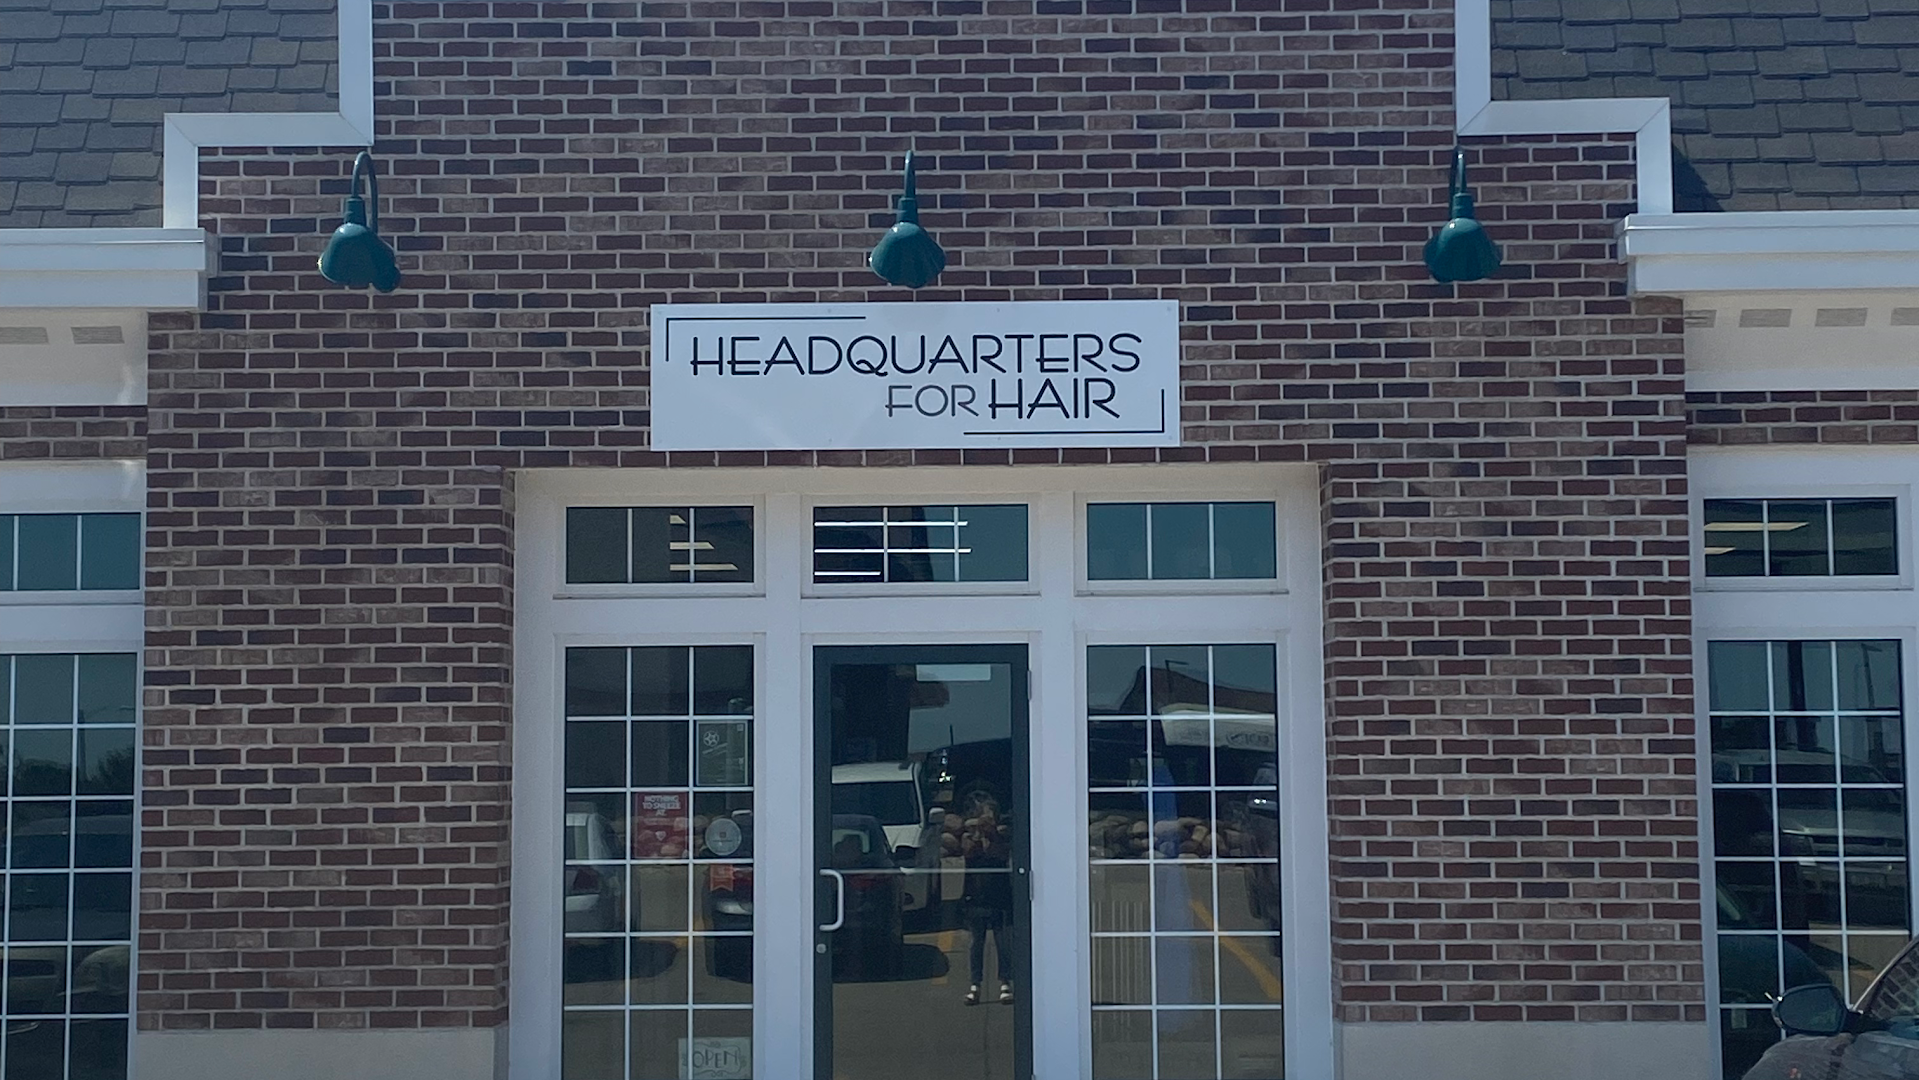 Headquarters For Hair